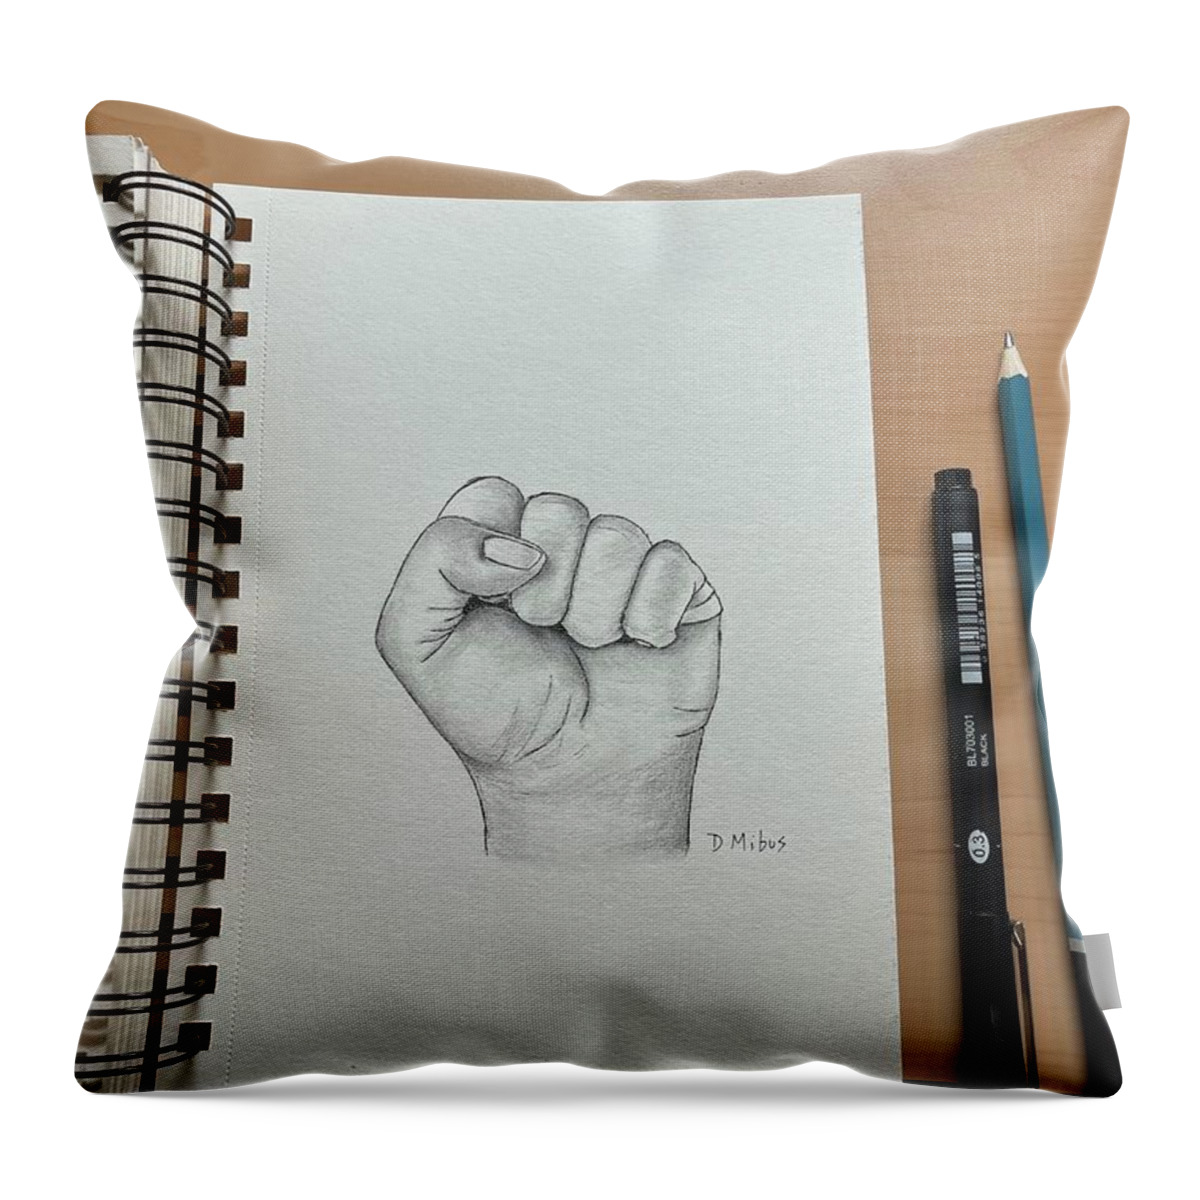  Throw Pillow featuring the digital art Day 126 Hand Drawing by Donna Mibus